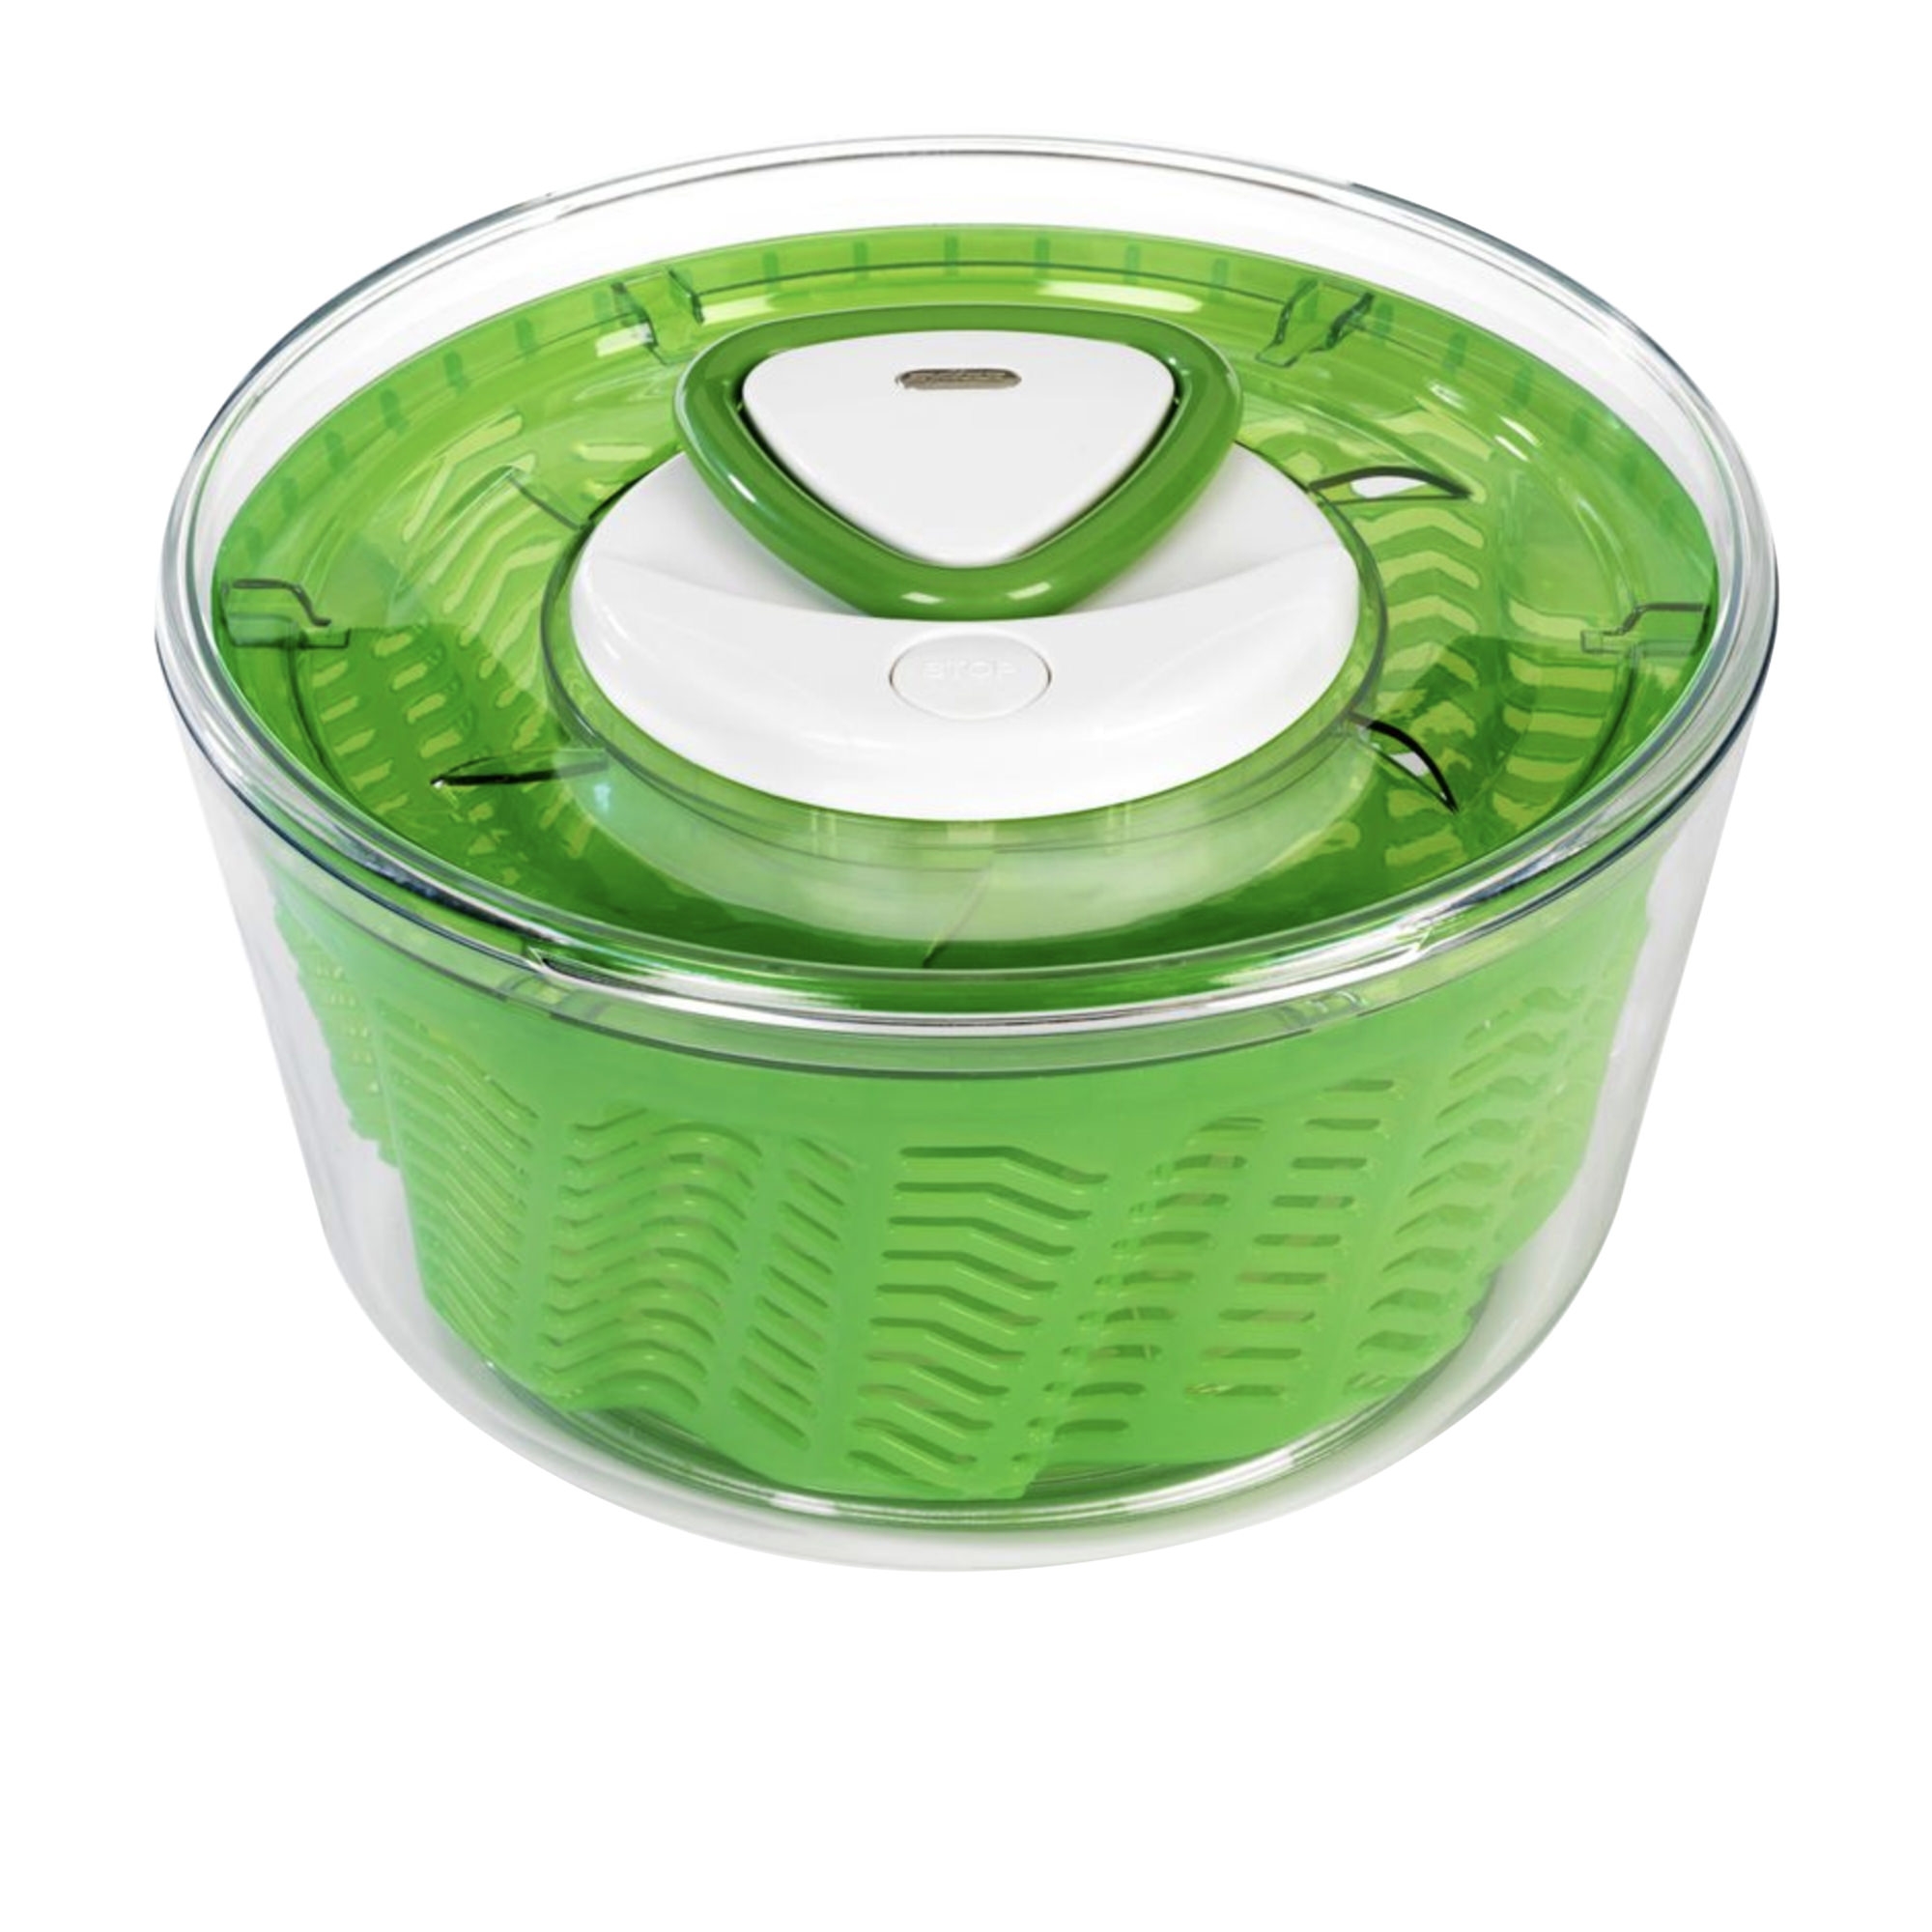 Zyliss Easy Spin 2 Salad Spinner Large Green Image 1